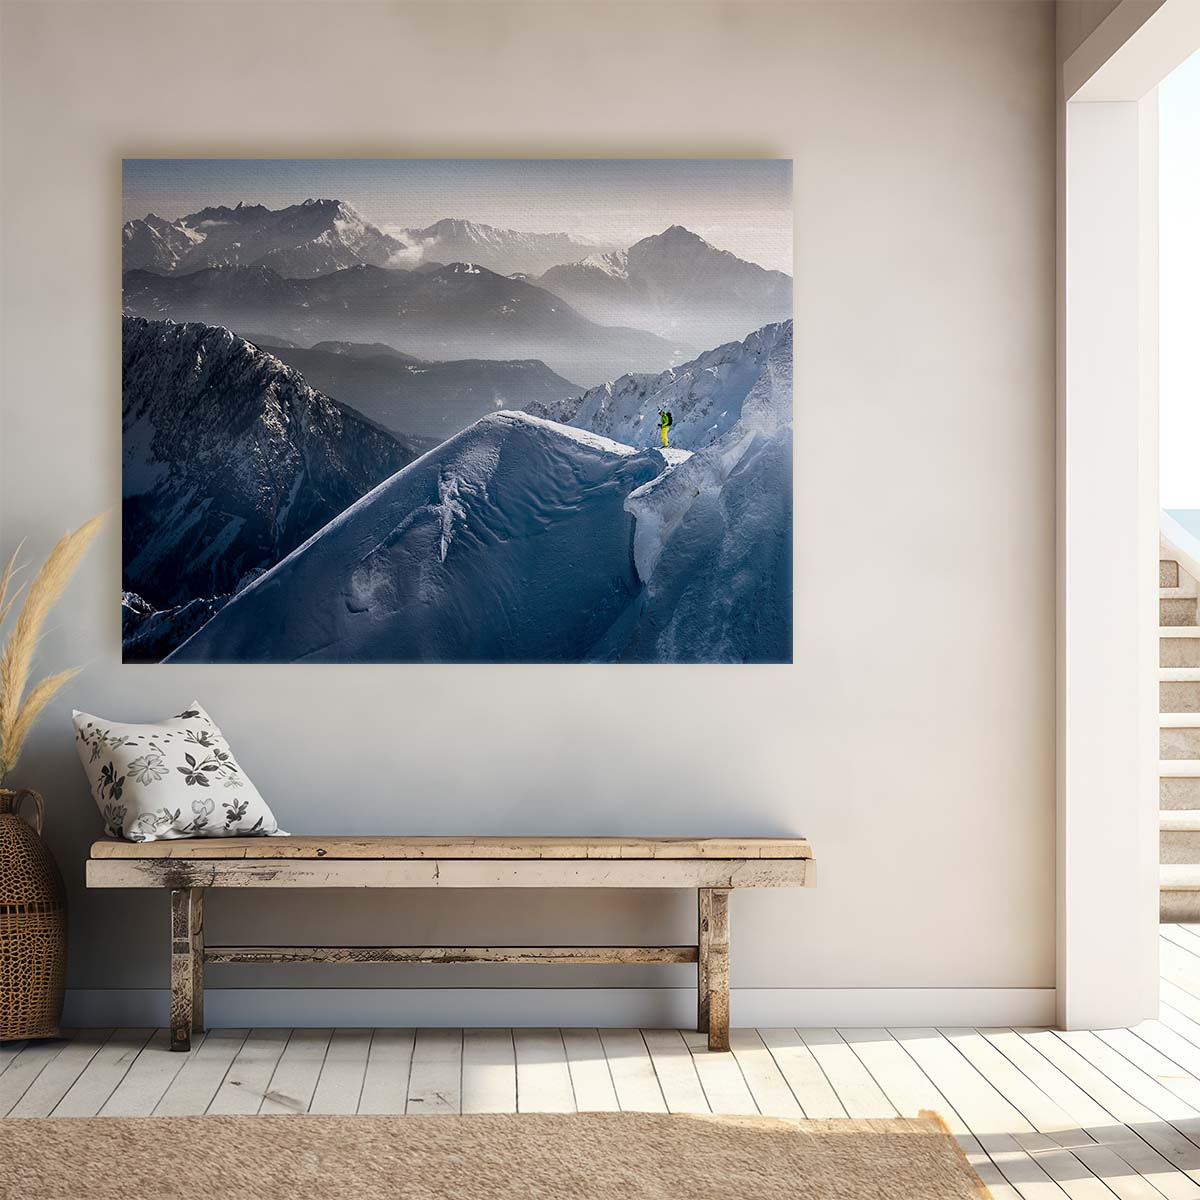 Alpine Ski Adventure SnowCapped Mountains Wall Art by Luxuriance Designs. Made in USA.